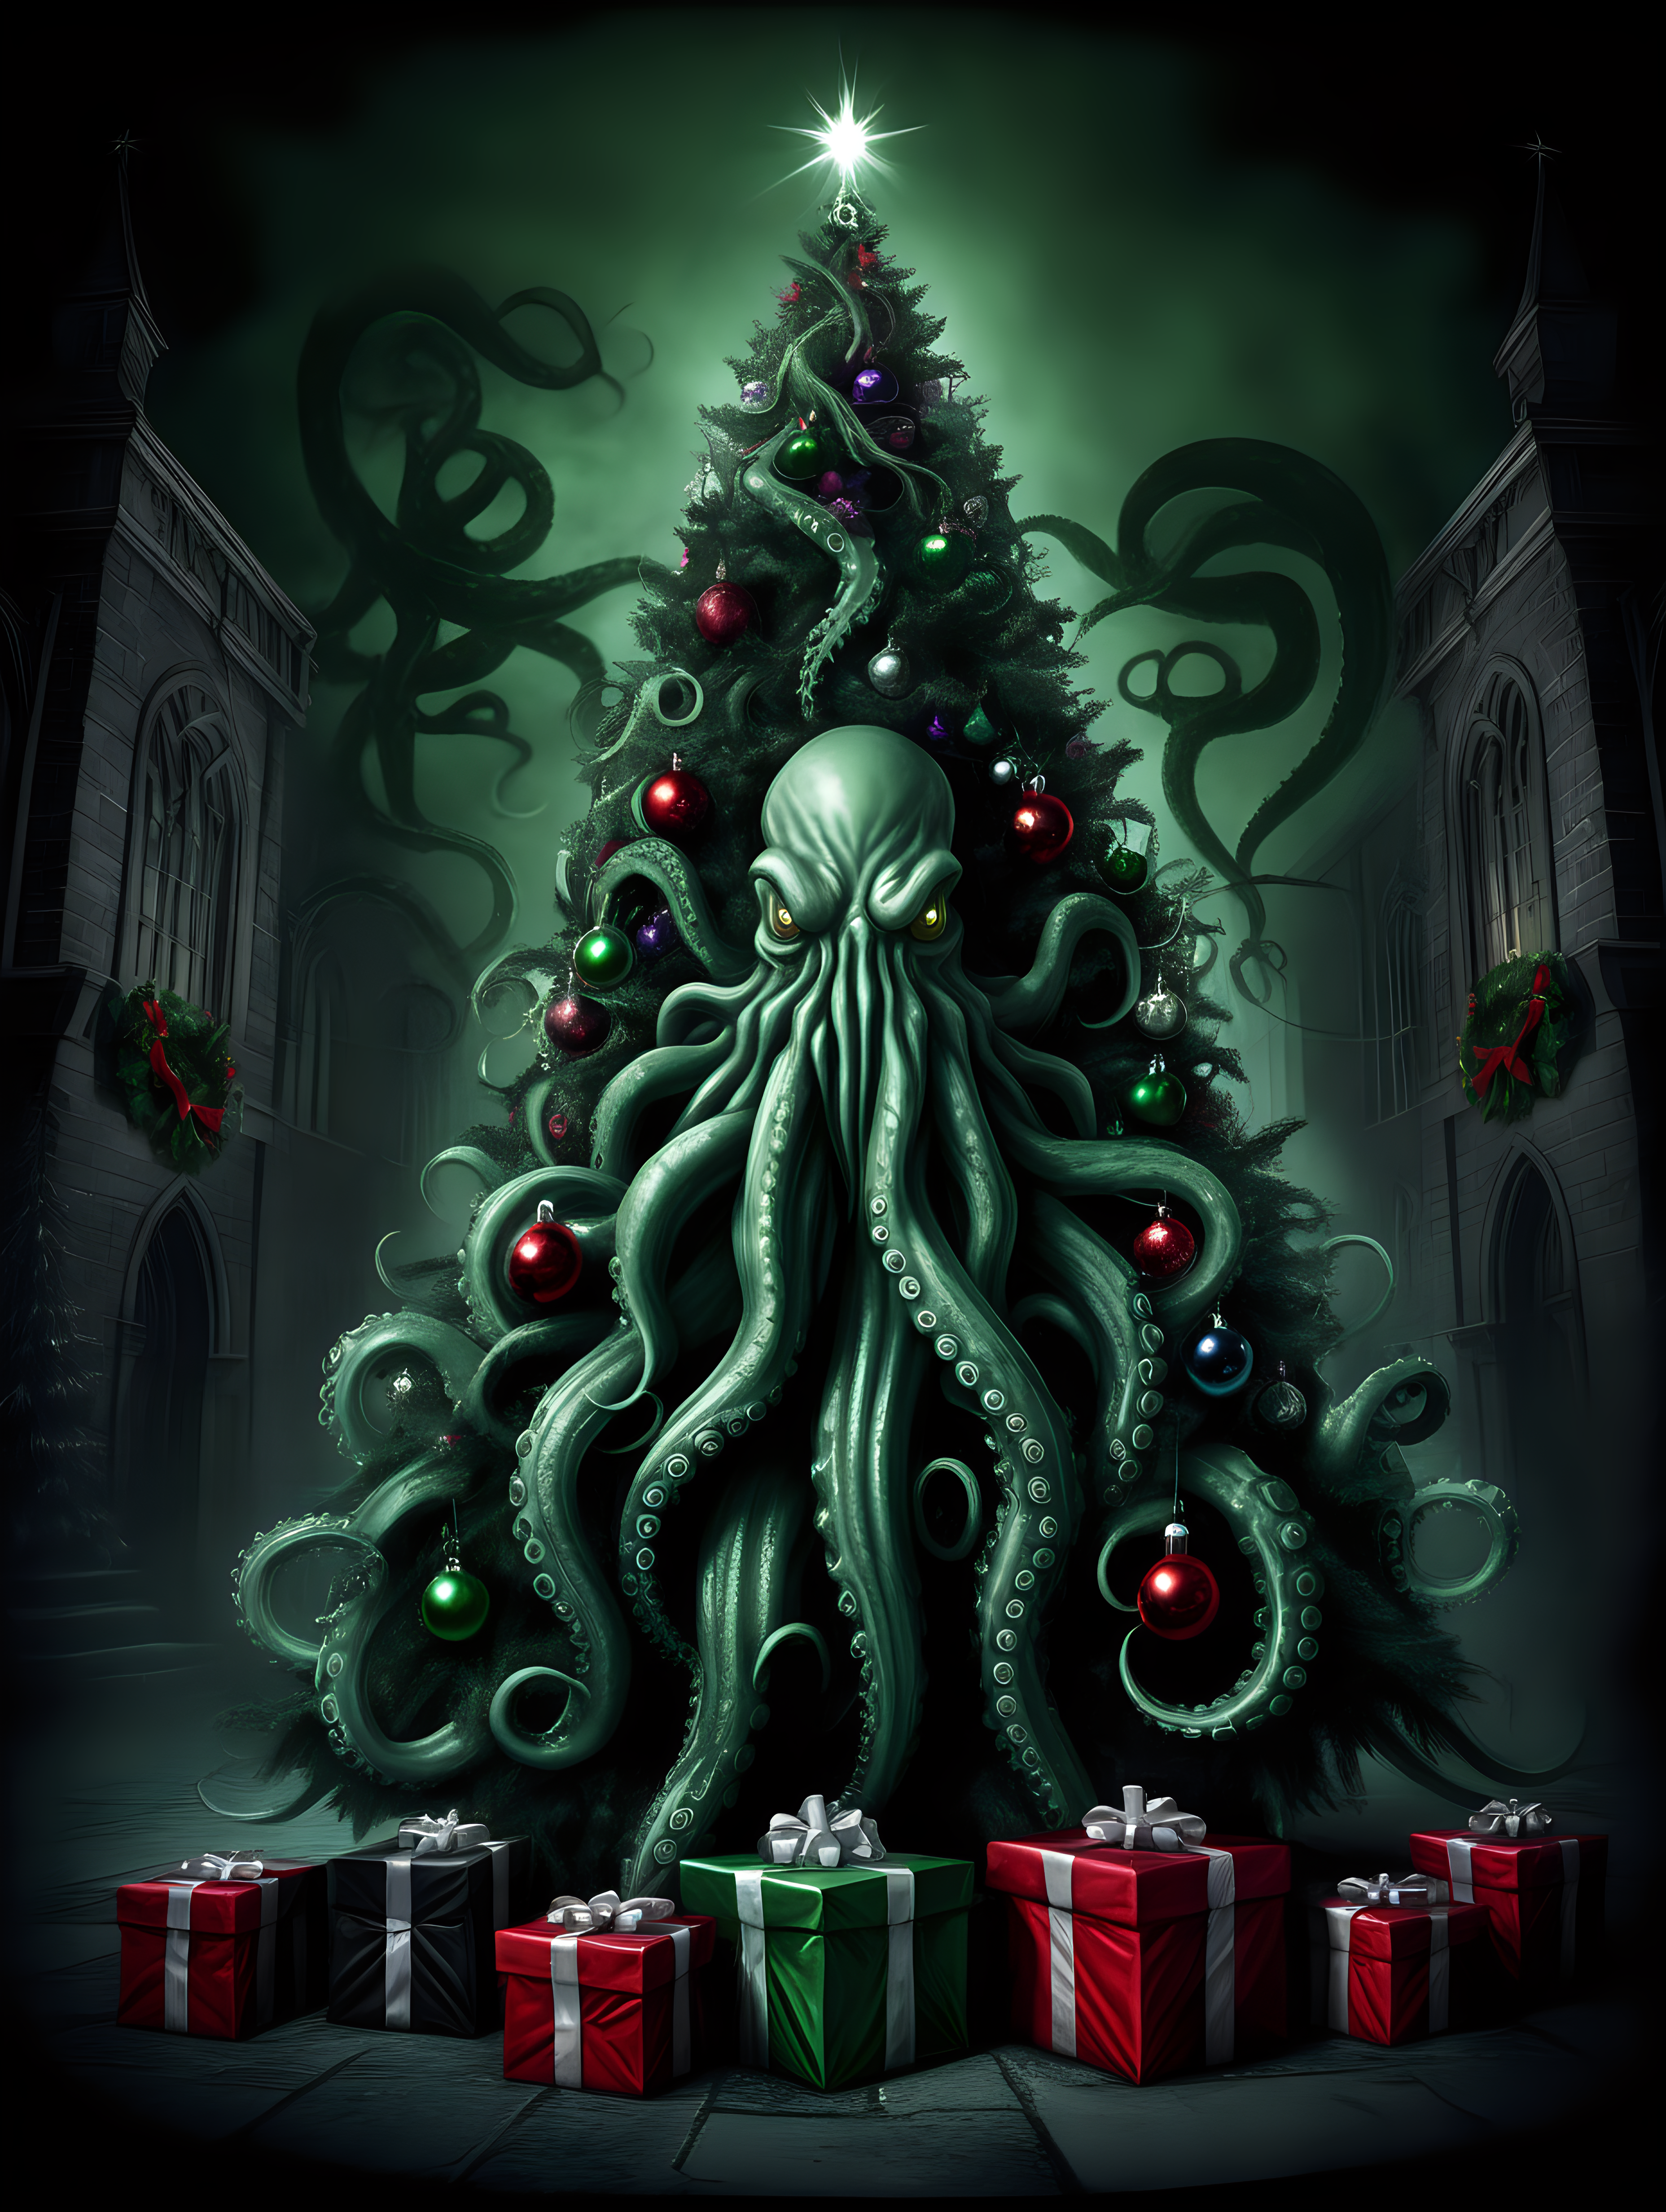 Gothic Christmas tree with Cthulhus tentacles reaching through